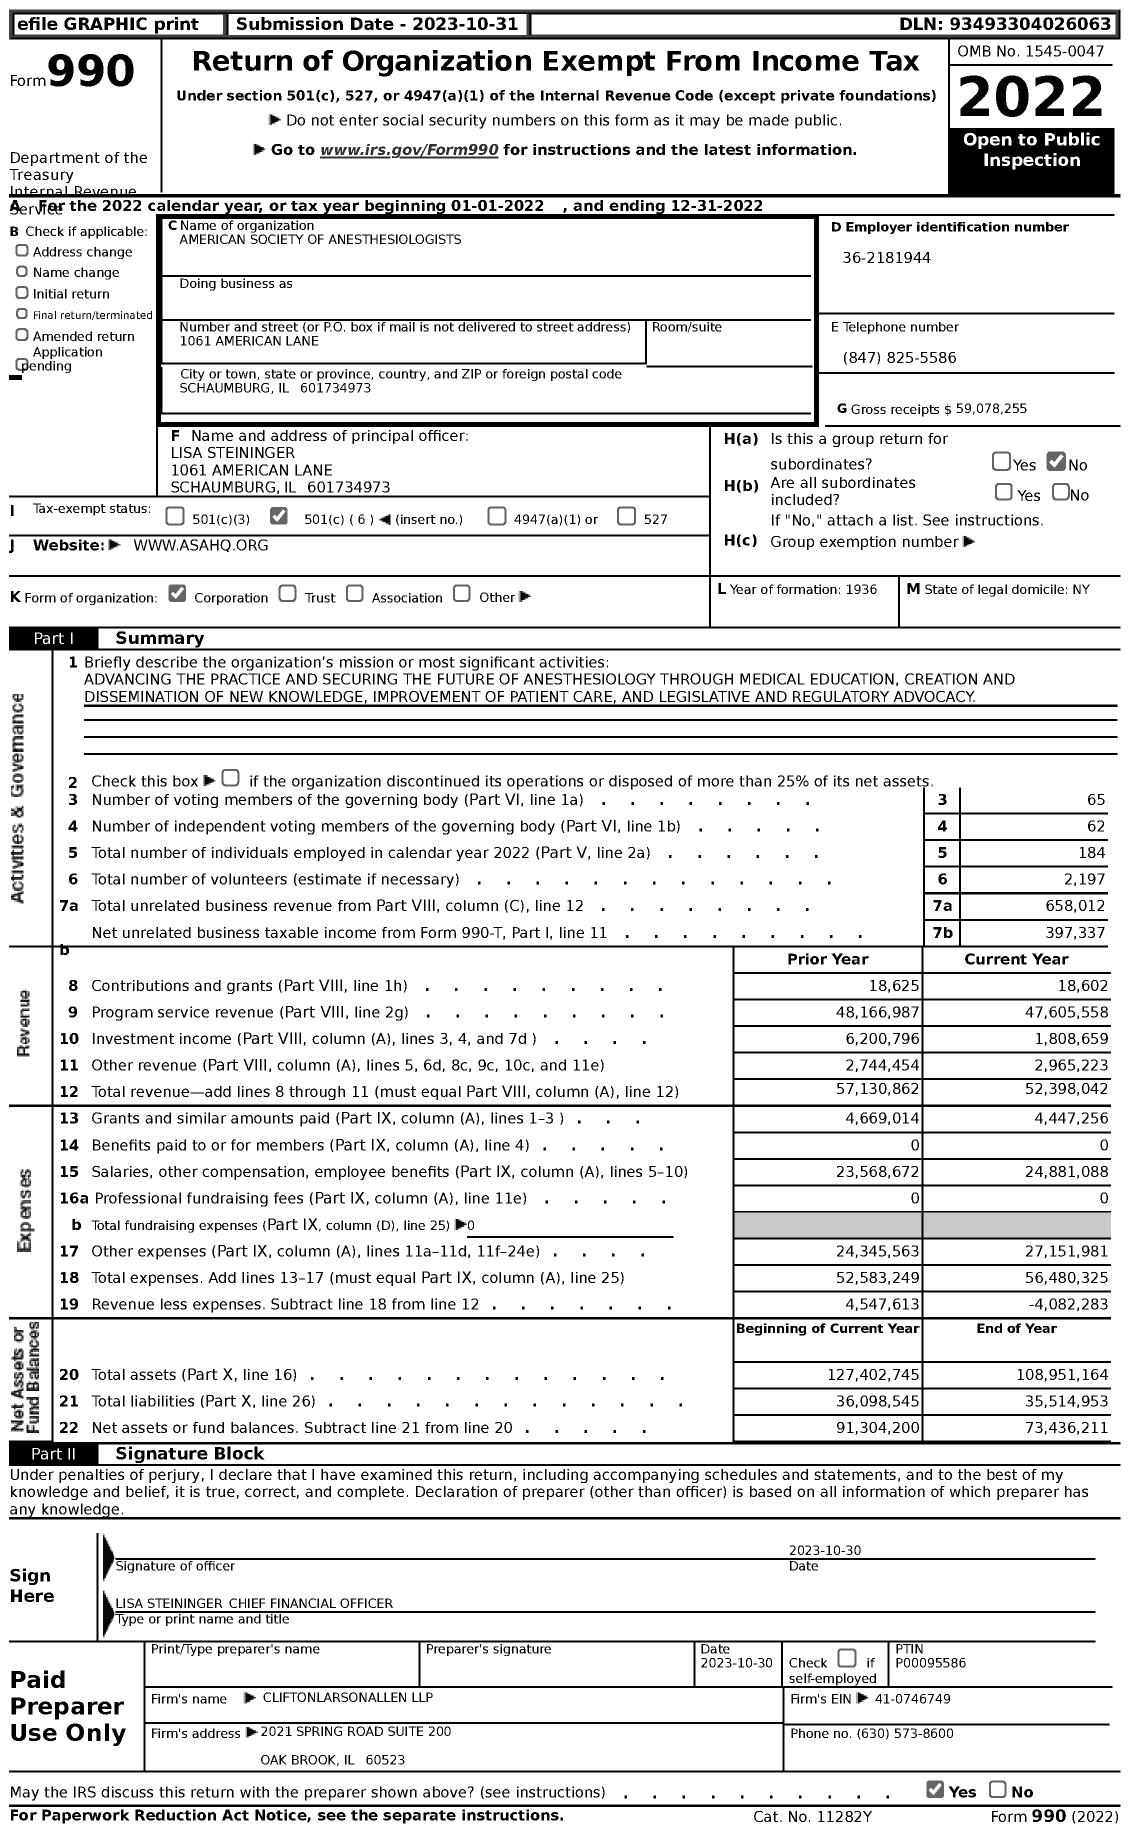 Image of first page of 2022 Form 990 for American Society of Anesthesiologists (ASA)